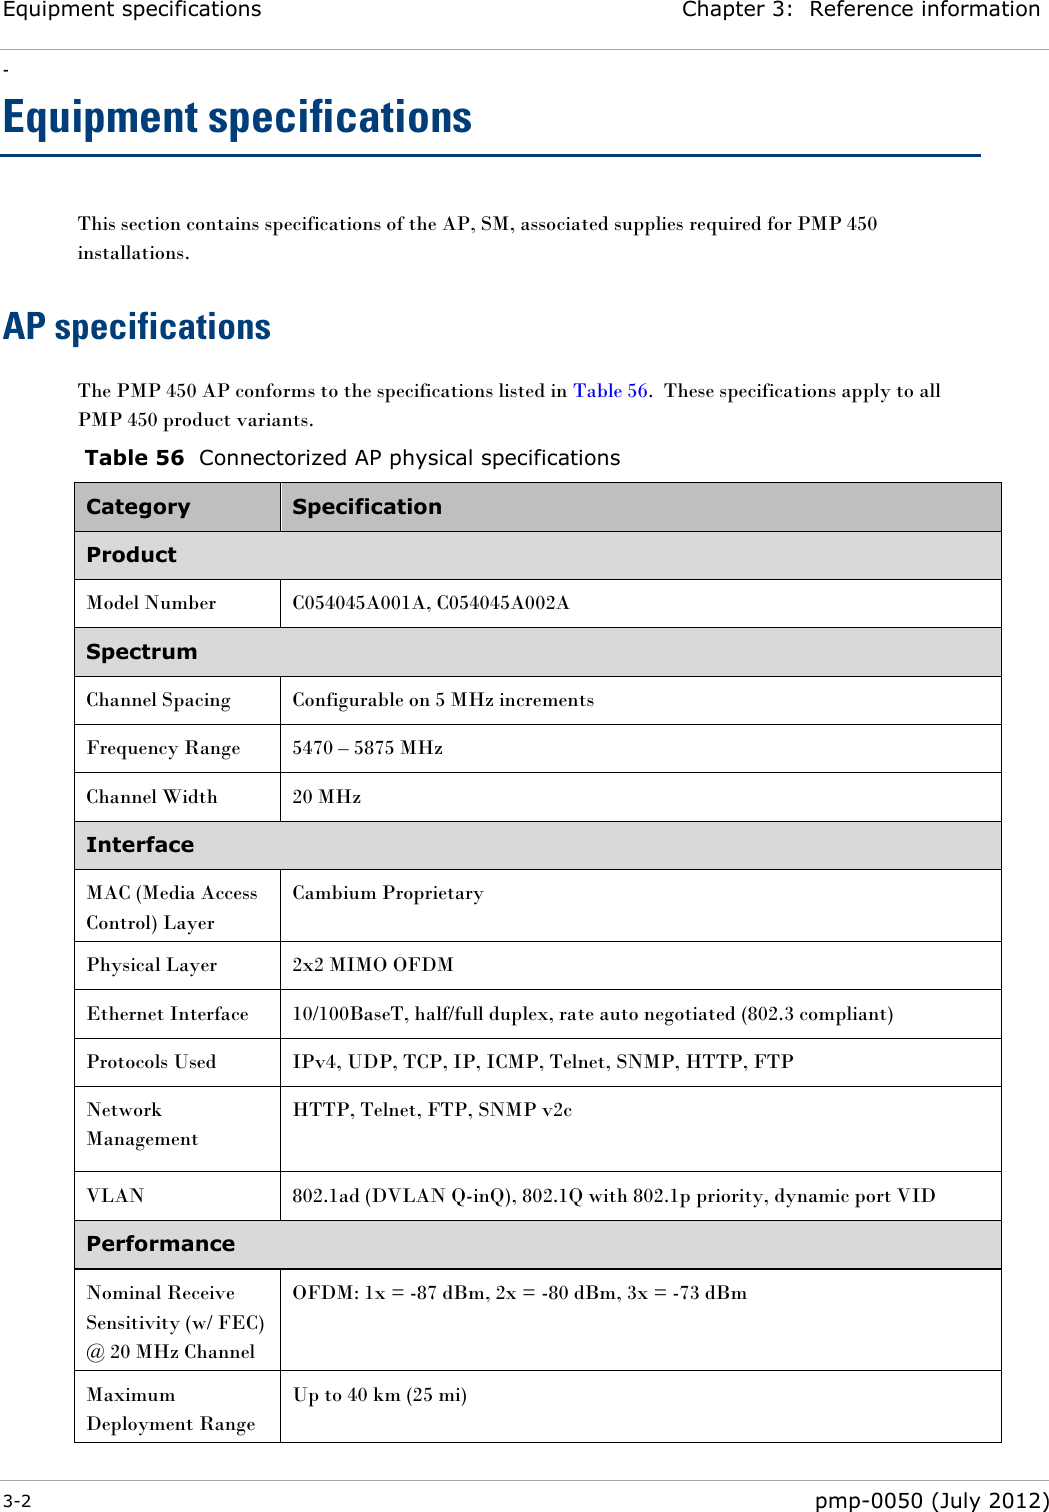 Equipment specifications Chapter 3:  Reference information - 3-2  pmp-0050 (July 2012)  Equipment specifications This section contains specifications of the AP, SM, associated supplies required for PMP 450 installations. AP specifications The PMP 450 AP conforms to the specifications listed in Table 56.  These specifications apply to all PMP 450 product variants.  Table 56  Connectorized AP physical specifications Category Specification Product Model Number C054045A001A, C054045A002A Spectrum Channel Spacing Configurable on 5 MHz increments Frequency Range 5470 – 5875 MHz Channel Width 20 MHz Interface MAC (Media Access Control) Layer Cambium Proprietary Physical Layer 2x2 MIMO OFDM Ethernet Interface 10/100BaseT, half/full duplex, rate auto negotiated (802.3 compliant) Protocols Used IPv4, UDP, TCP, IP, ICMP, Telnet, SNMP, HTTP, FTP Network Management HTTP, Telnet, FTP, SNMP v2c VLAN 802.1ad (DVLAN Q-inQ), 802.1Q with 802.1p priority, dynamic port VID Performance Nominal Receive Sensitivity (w/ FEC) @ 20 MHz Channel OFDM: 1x = -87 dBm, 2x = -80 dBm, 3x = -73 dBm Maximum Deployment Range Up to 40 km (25 mi) 